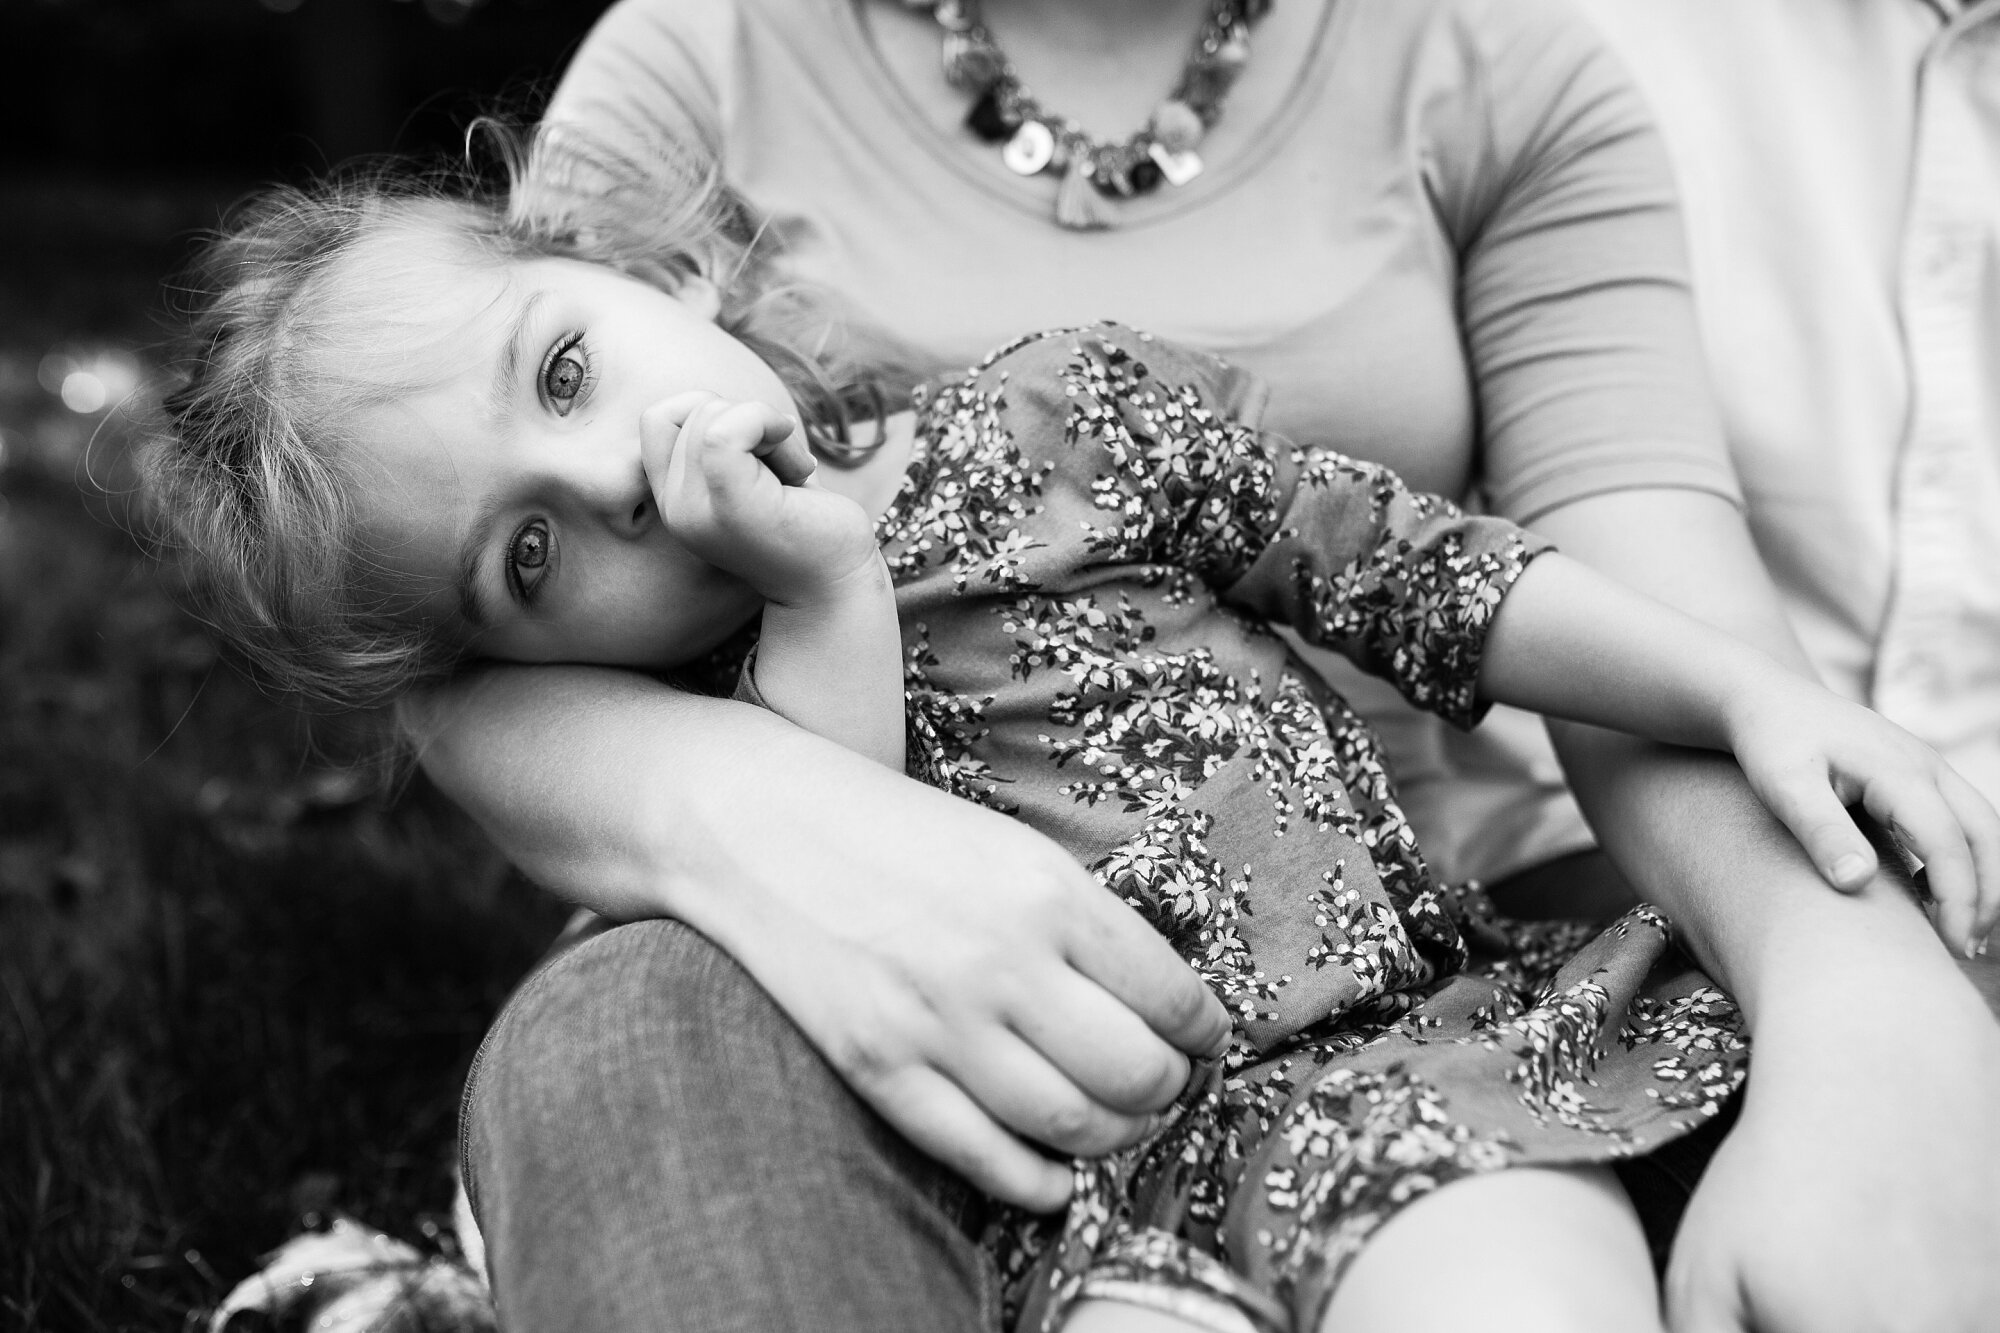 Three year old toddler rests in her pregnant mom's lap and sucks her thumb at the Azalea Gardens, Fairmount, Philadelphia Family Photographer